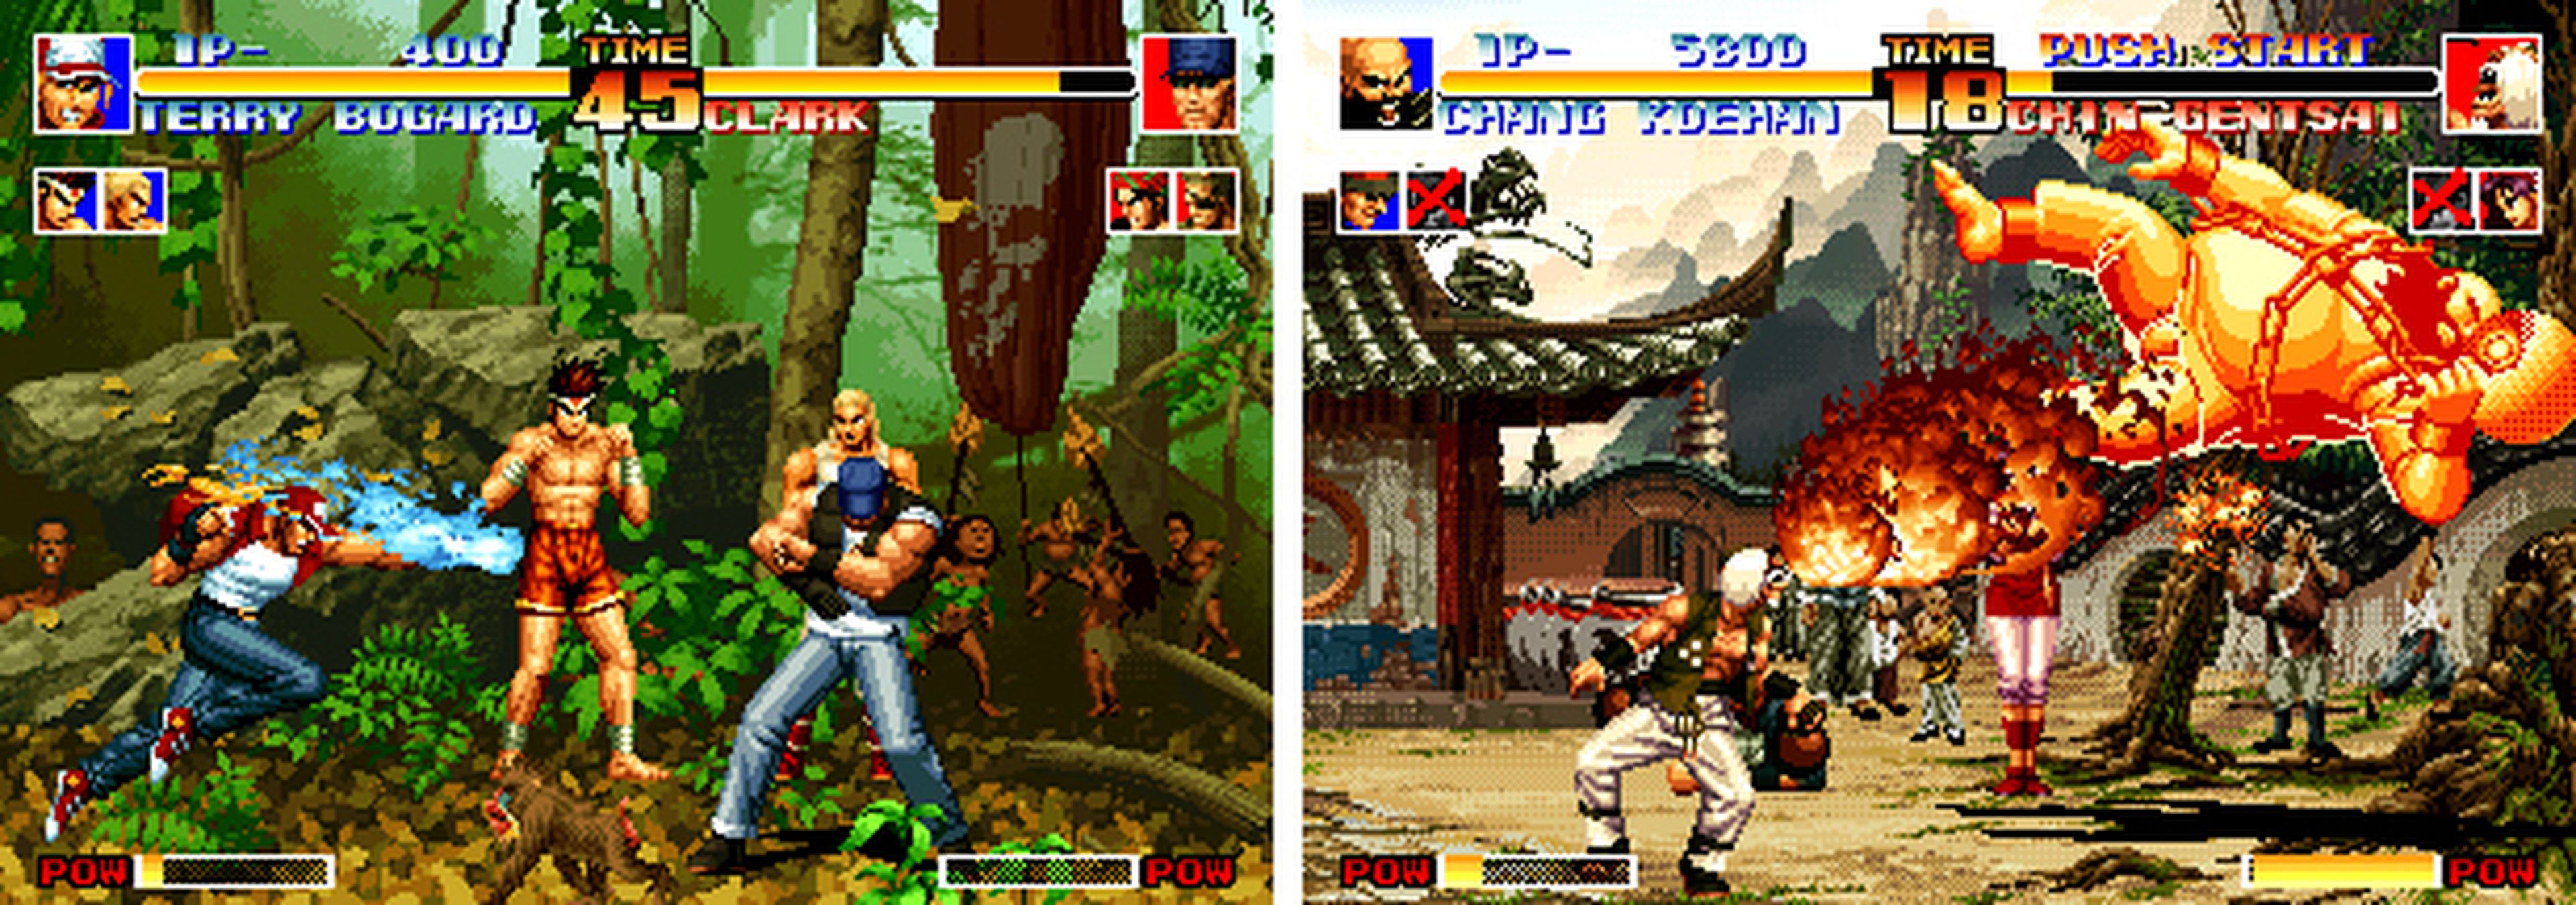 Hobby Consolas, hace 20 años: The King of Fighters '94